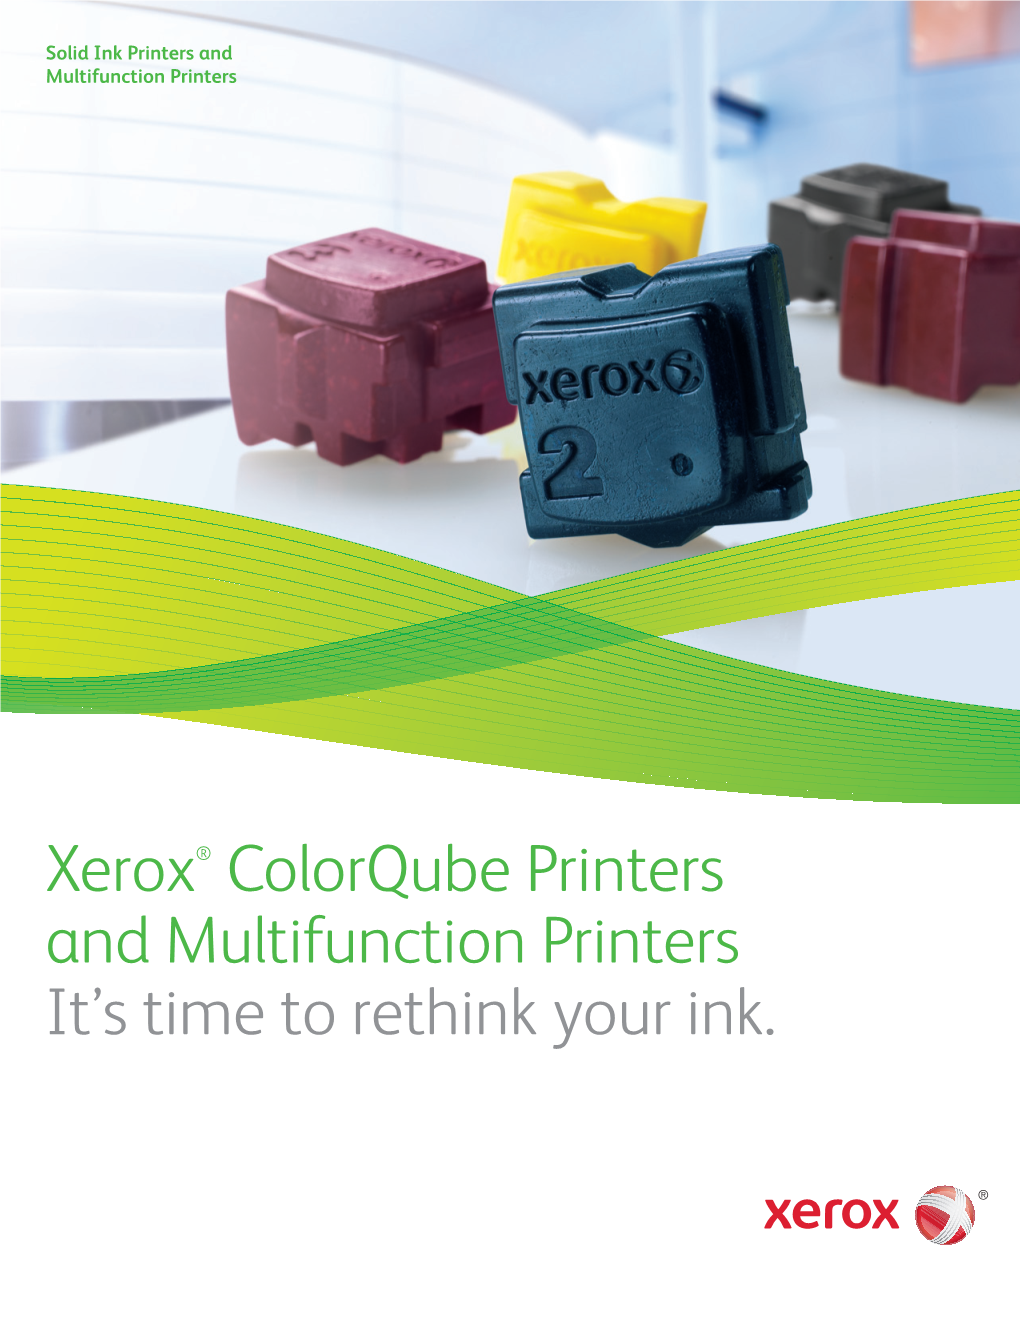 Xerox Colorqube Solid Ink Printers and Mfps